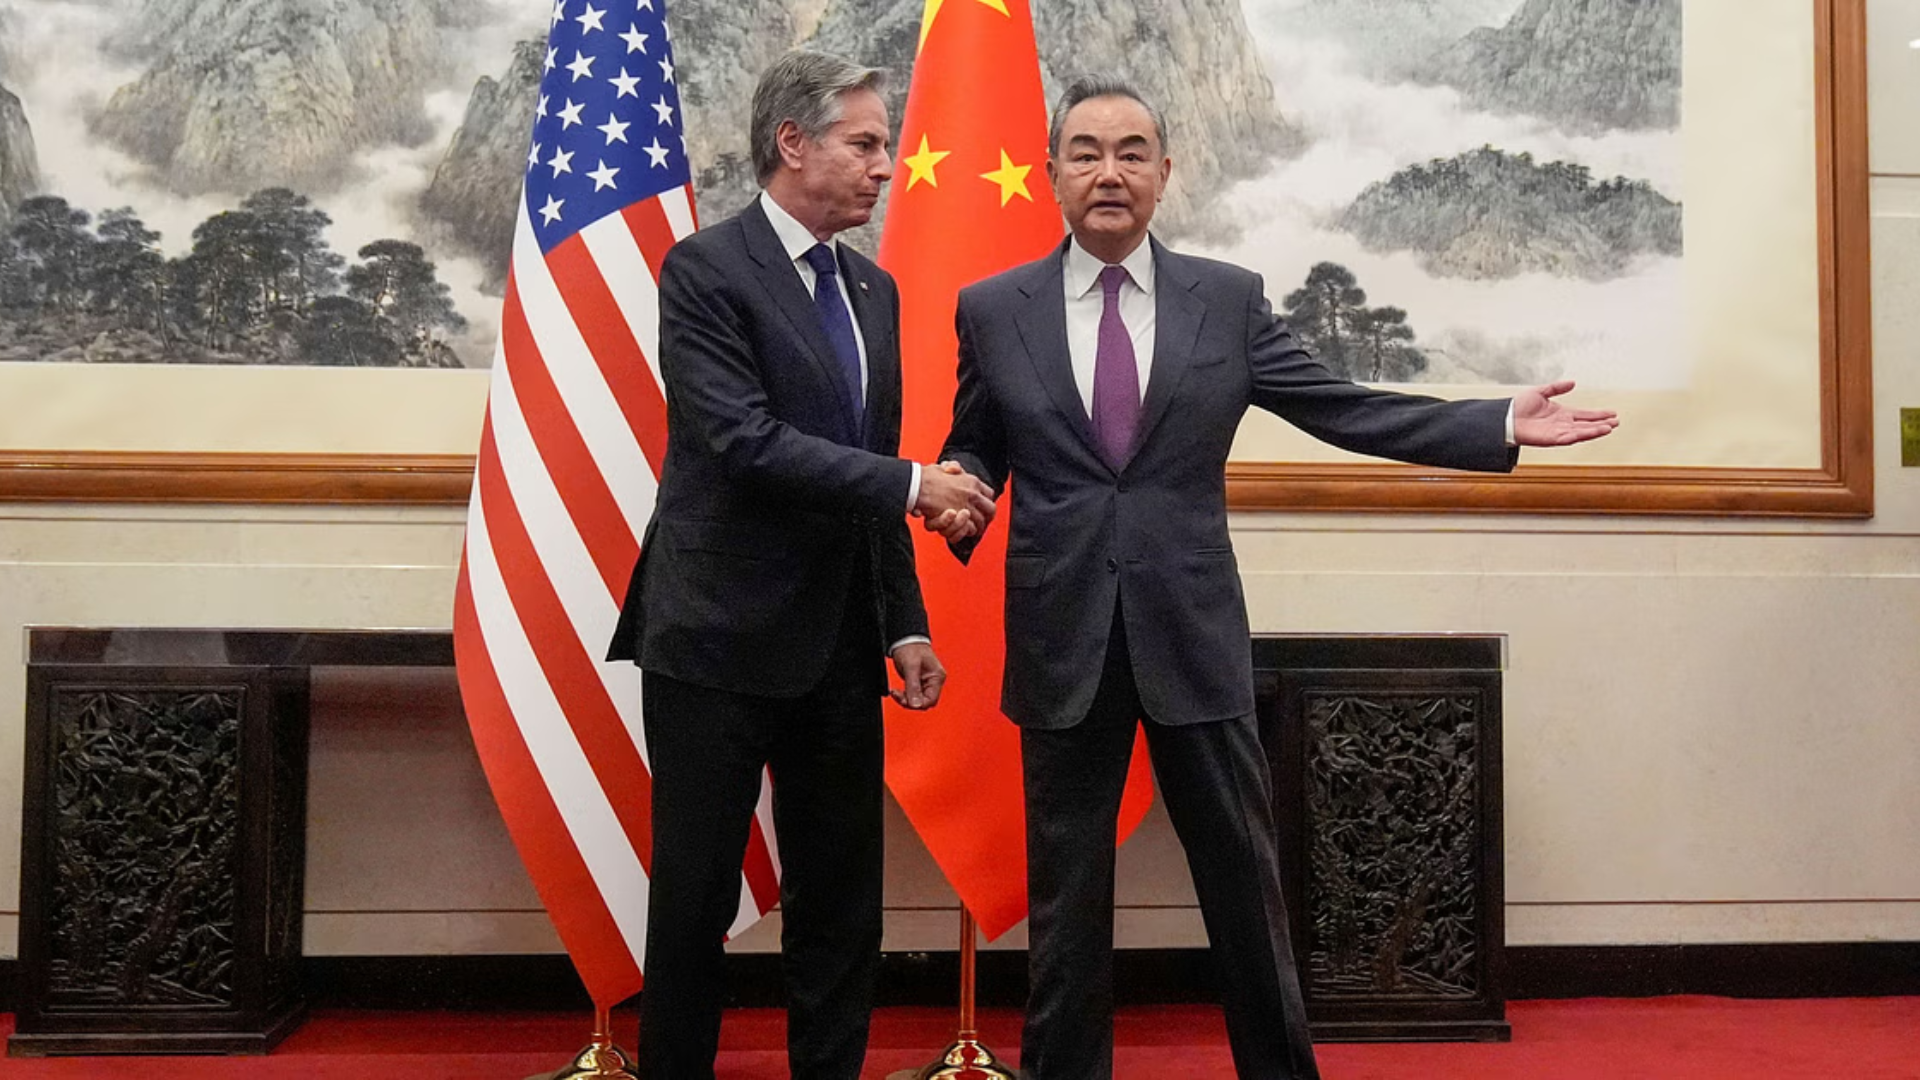 Negative factor building in China-US relations: Know why?